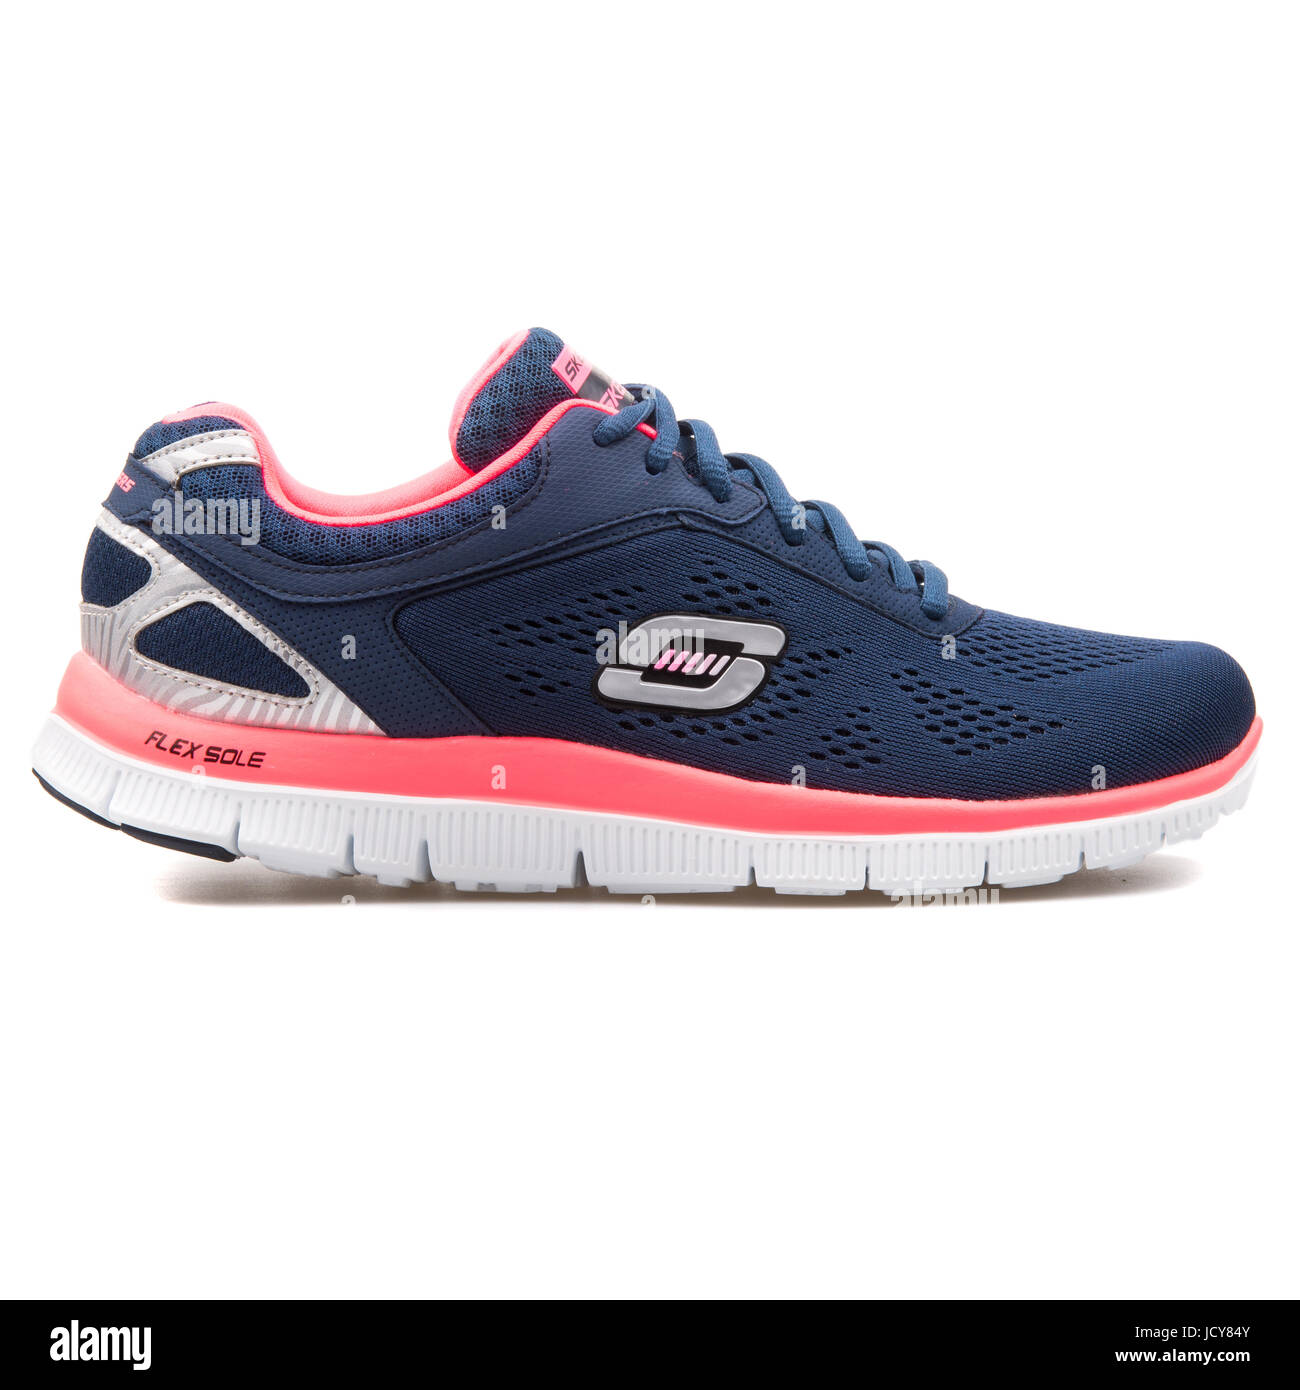 Skechers Flex Appeal Love Your Style Navy Blue and Hot Pink Women's Running  Shoes - 11728-NVHP Stock Photo - Alamy